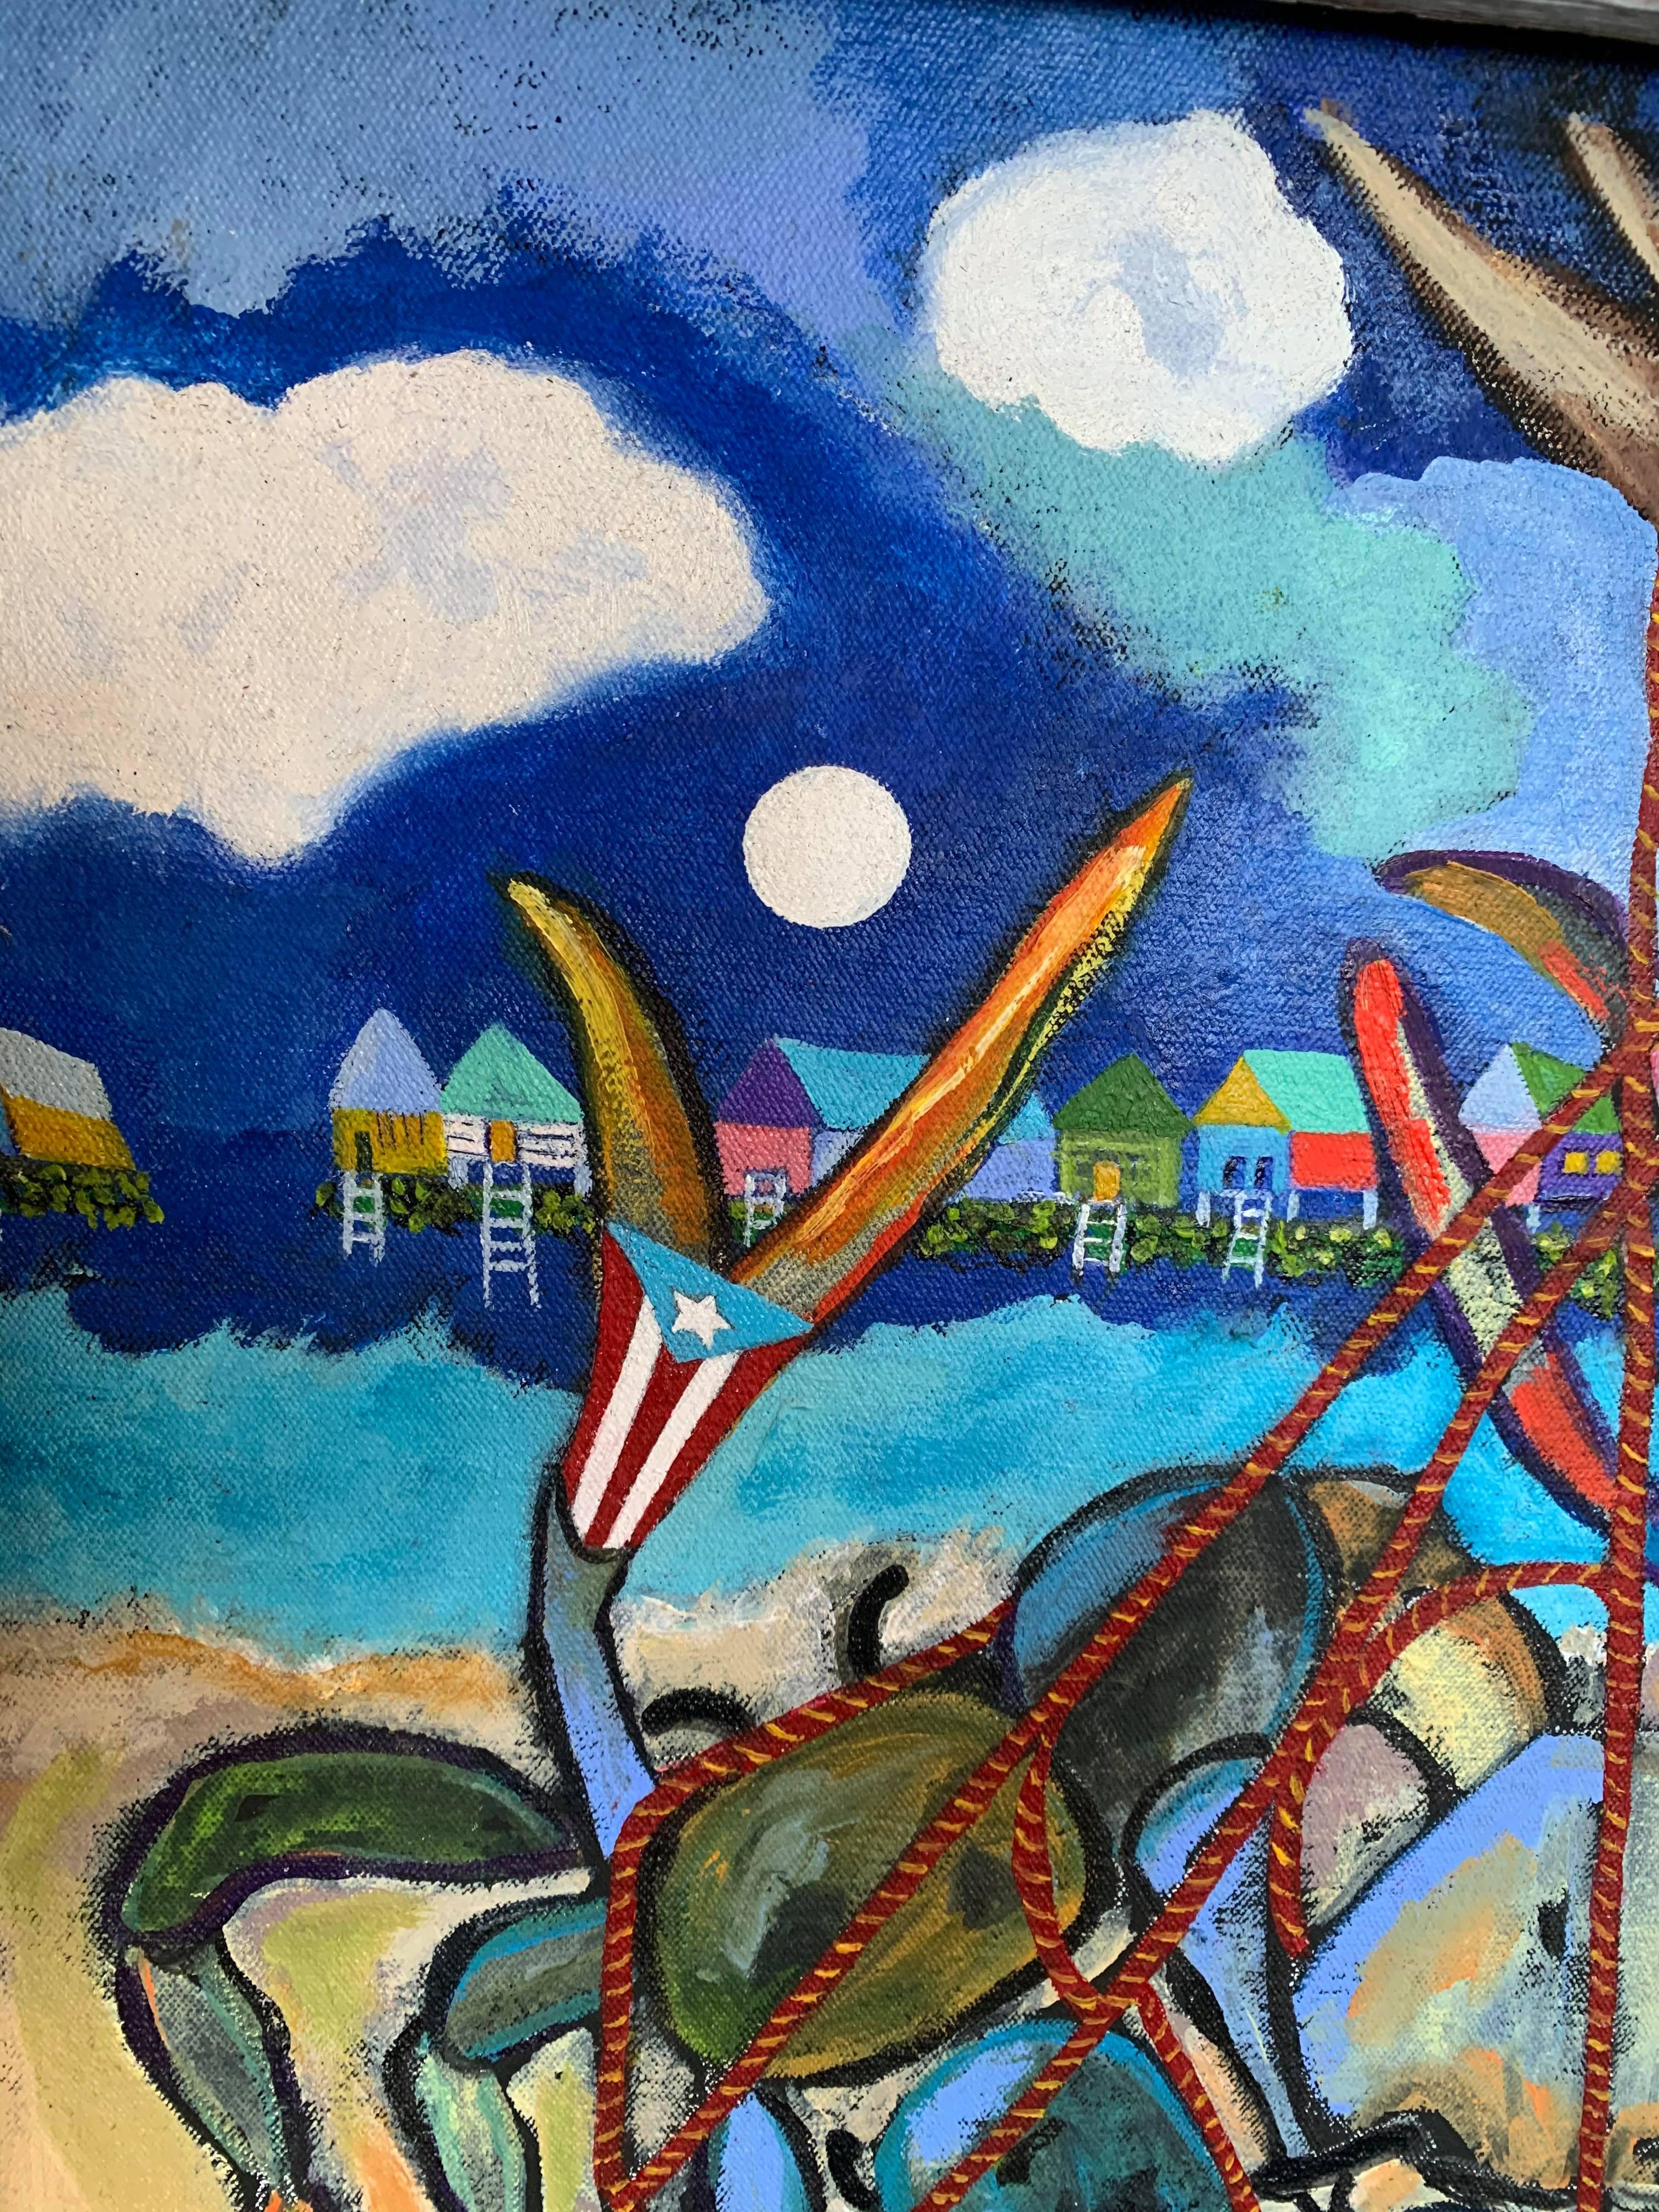 This mixed media painting is of crabs caught in a net. Framing the cerulean blue crabs are green and violet grapes hanging off of a branch. There houses in the fishing village have lights on; the houses on the shoreline run the gamut in colors like